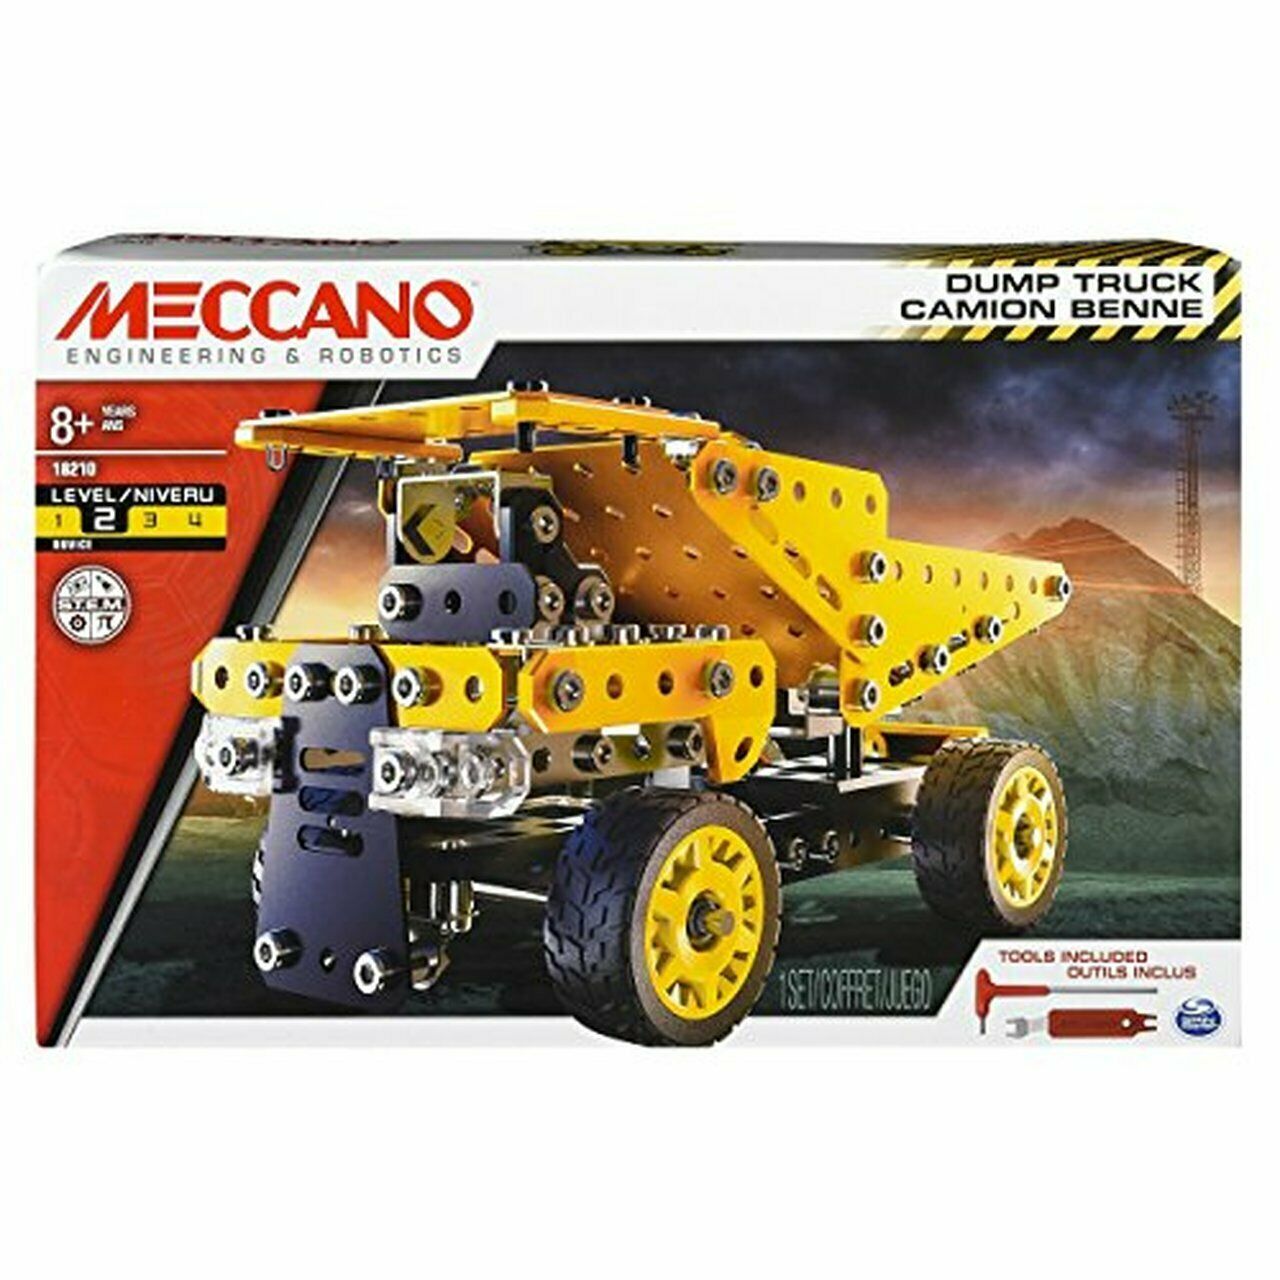 Primary image for Erector by Meccano Dump Truck Model Vehicle Building Kit, STEM Education Toy